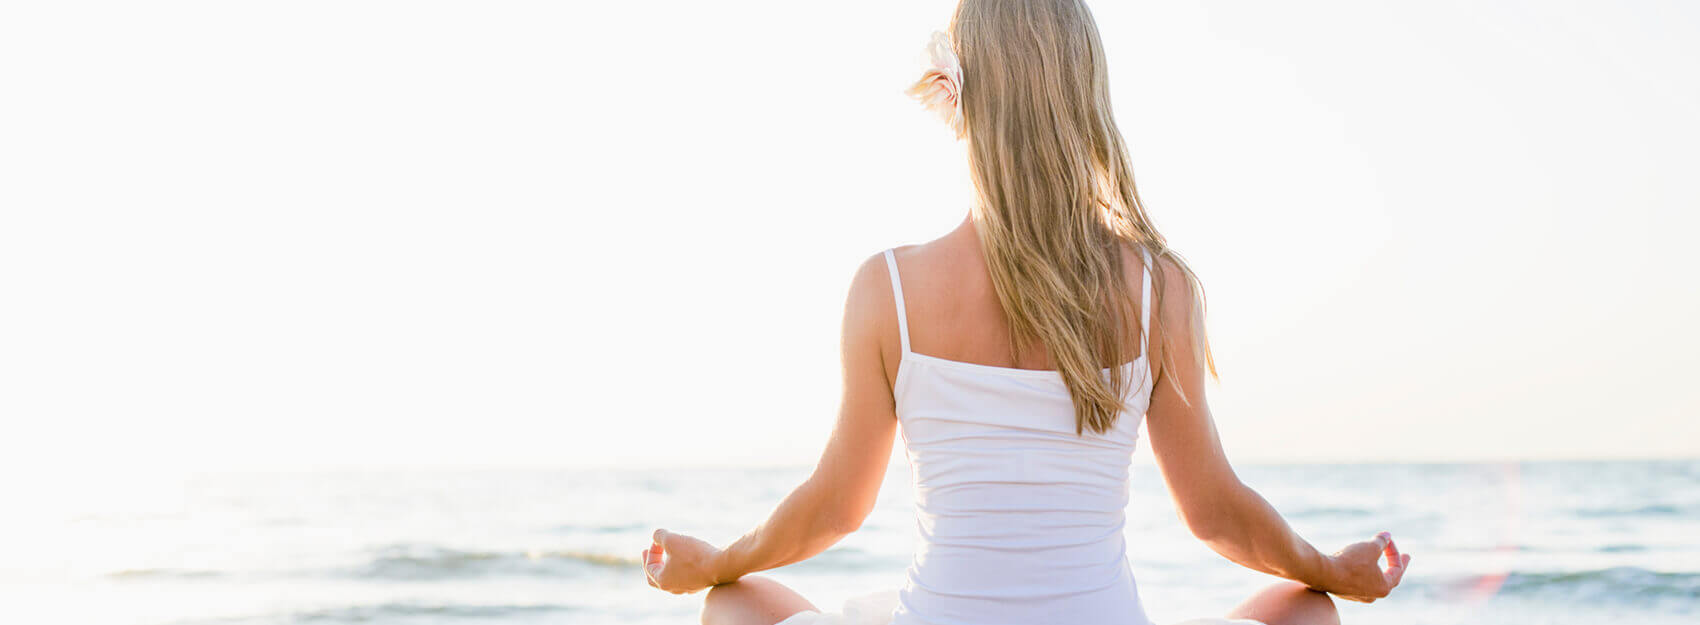 Woman in white top sitting on a beach meditating